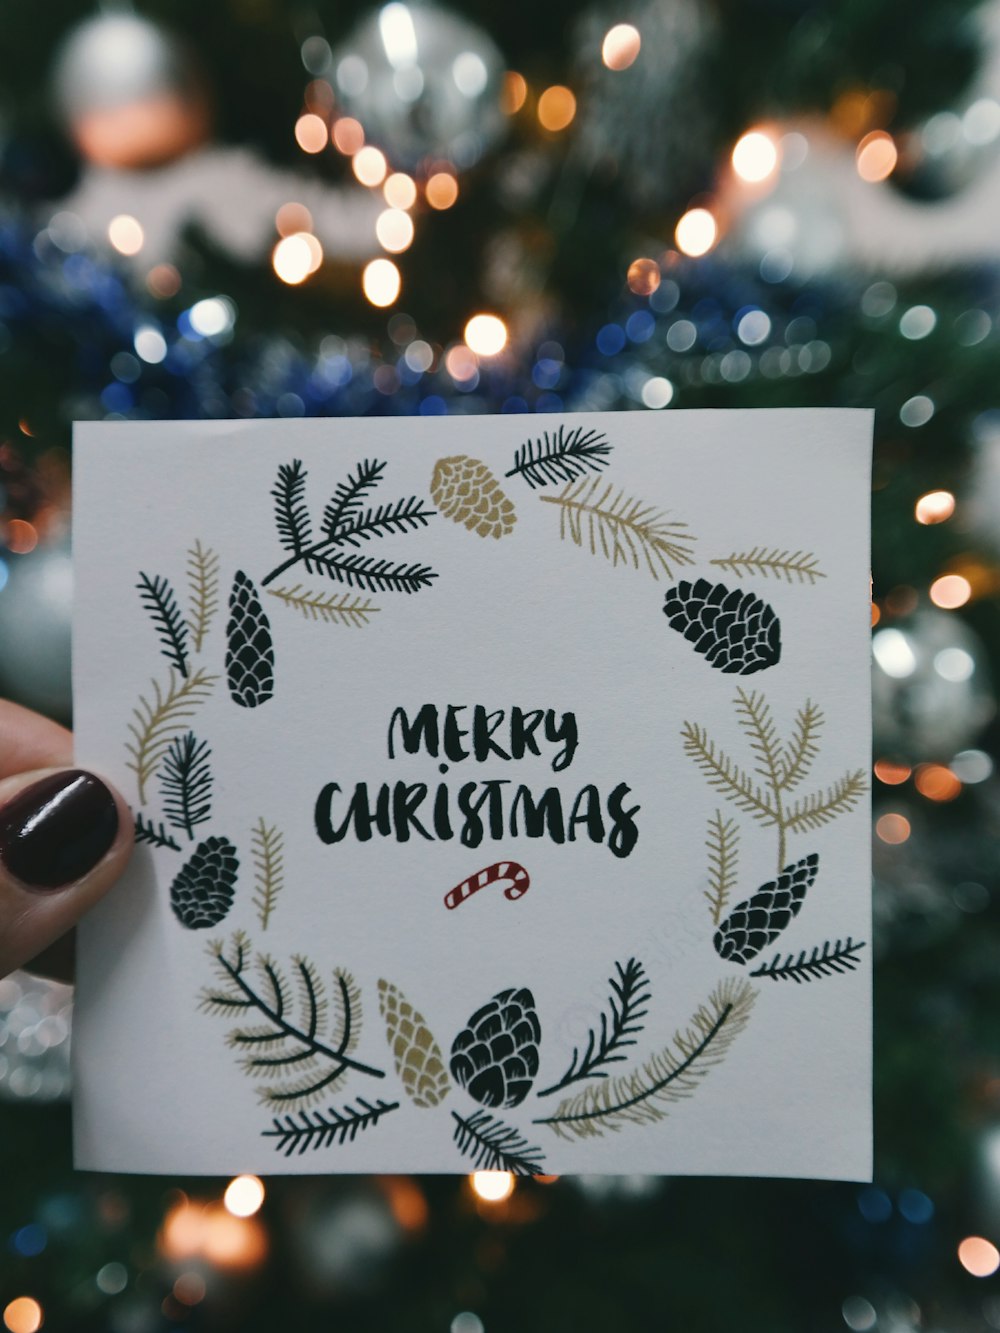 A piece of paper that says "Merry Christmas" with a wreath around it, being held up in front of an XMAS tree.